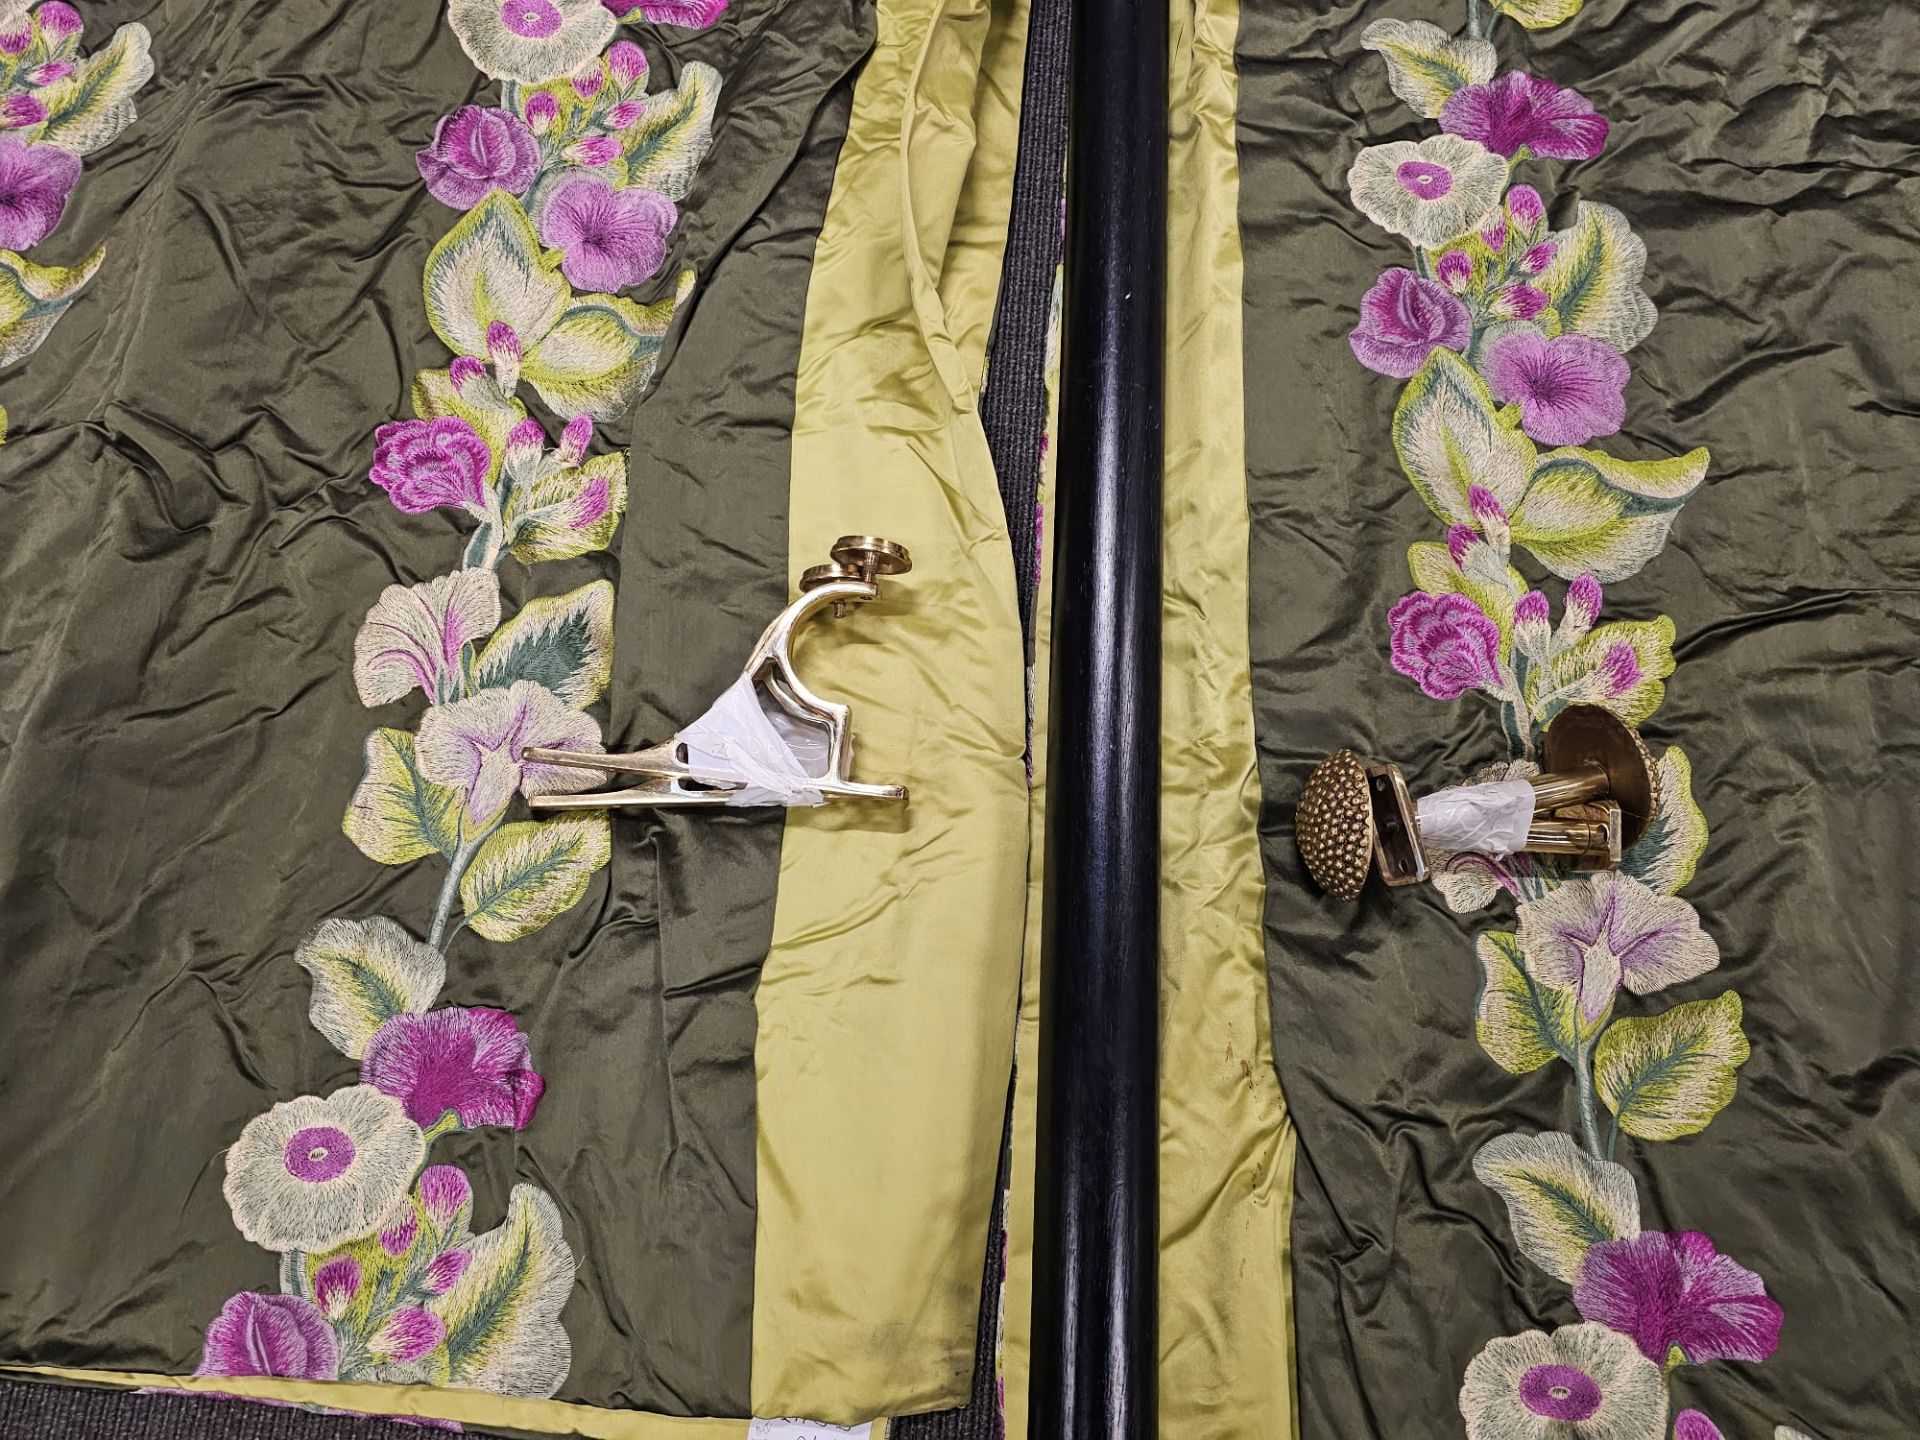 A pair of silk drapes green and pink floral pattern with wood curtain pole 176 x 280cm (Dorch 14) - Image 2 of 3